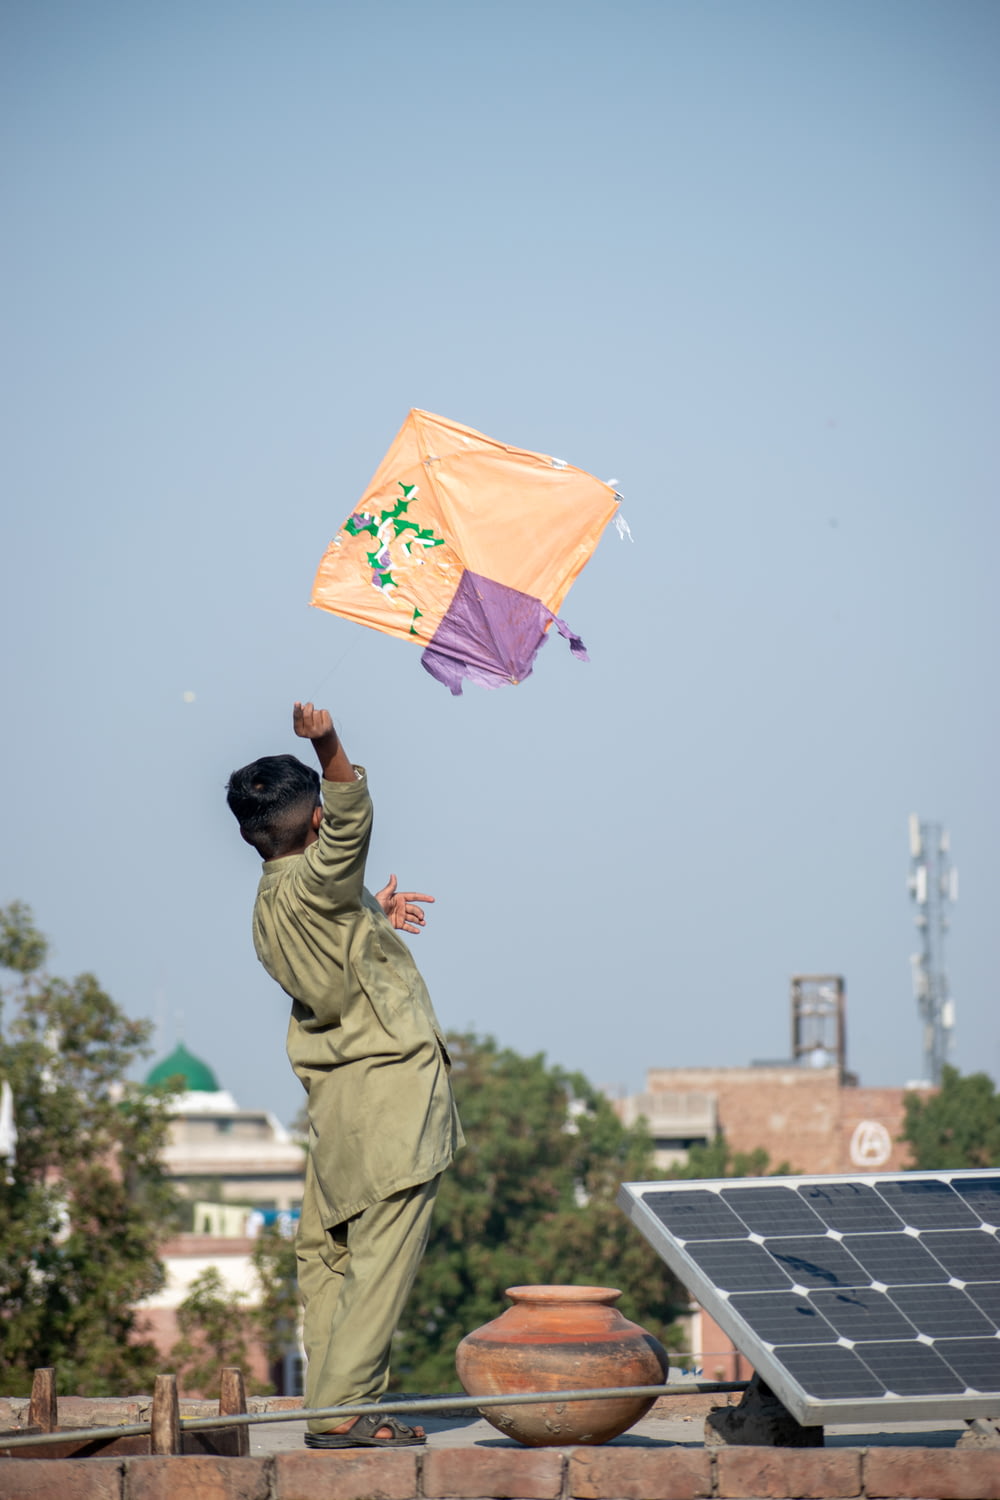 a man flying a kite on top of a roof